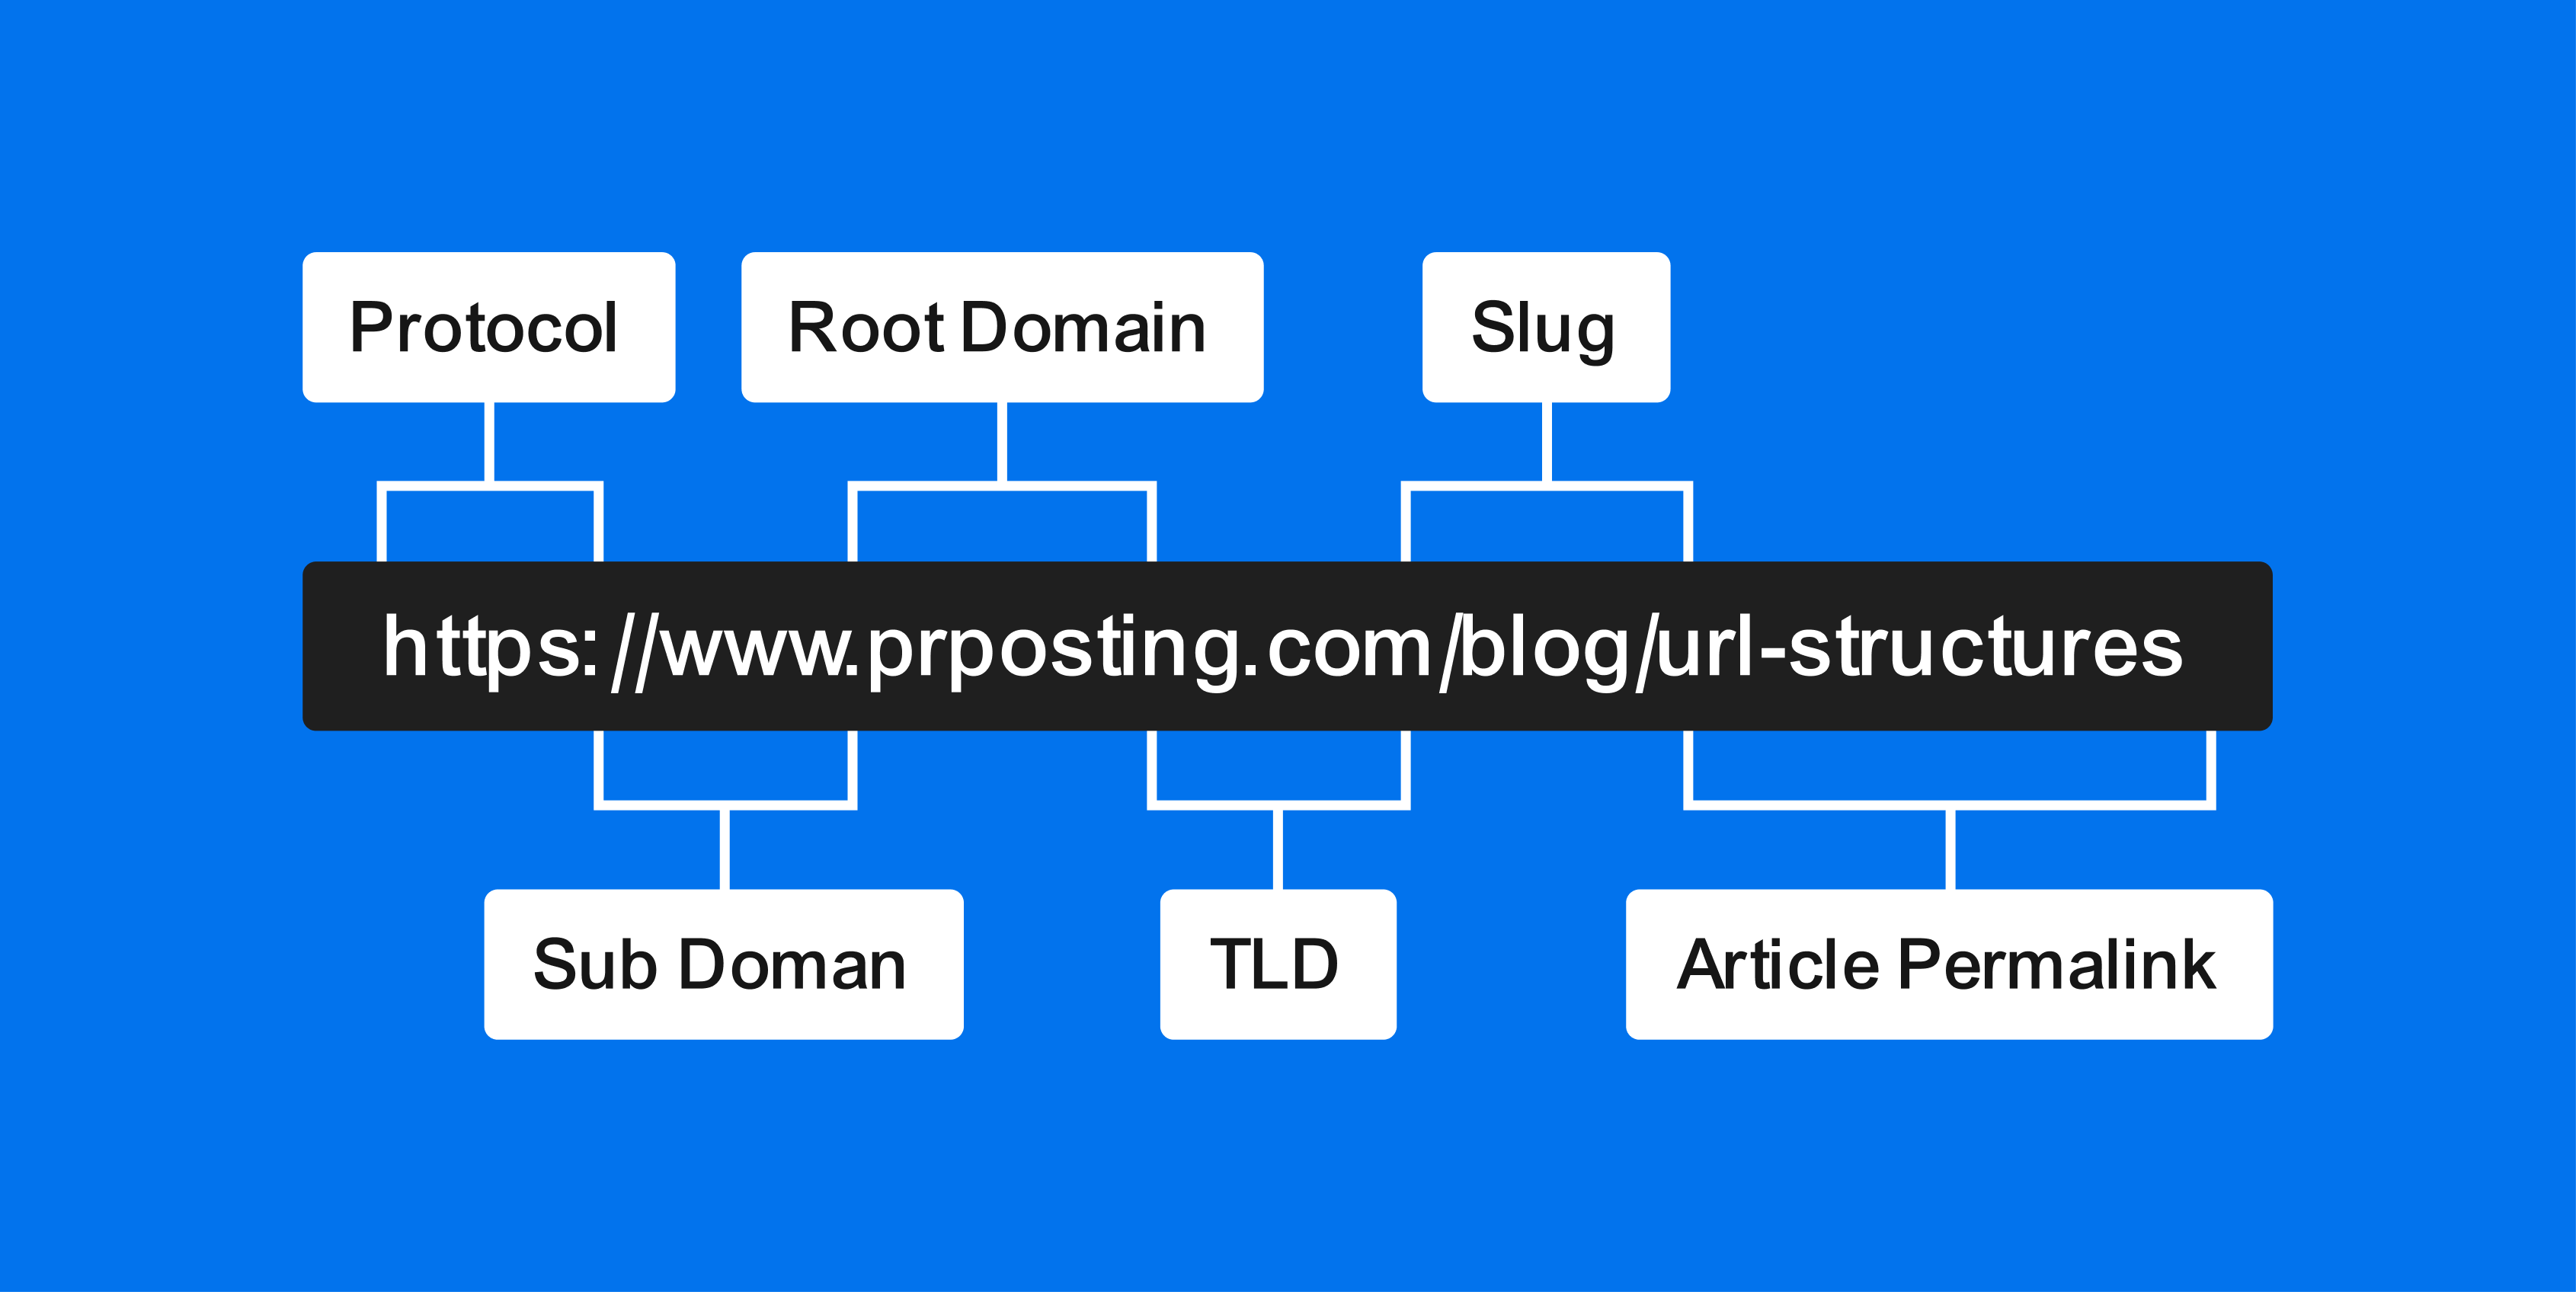 What Are the Parts of a URL?